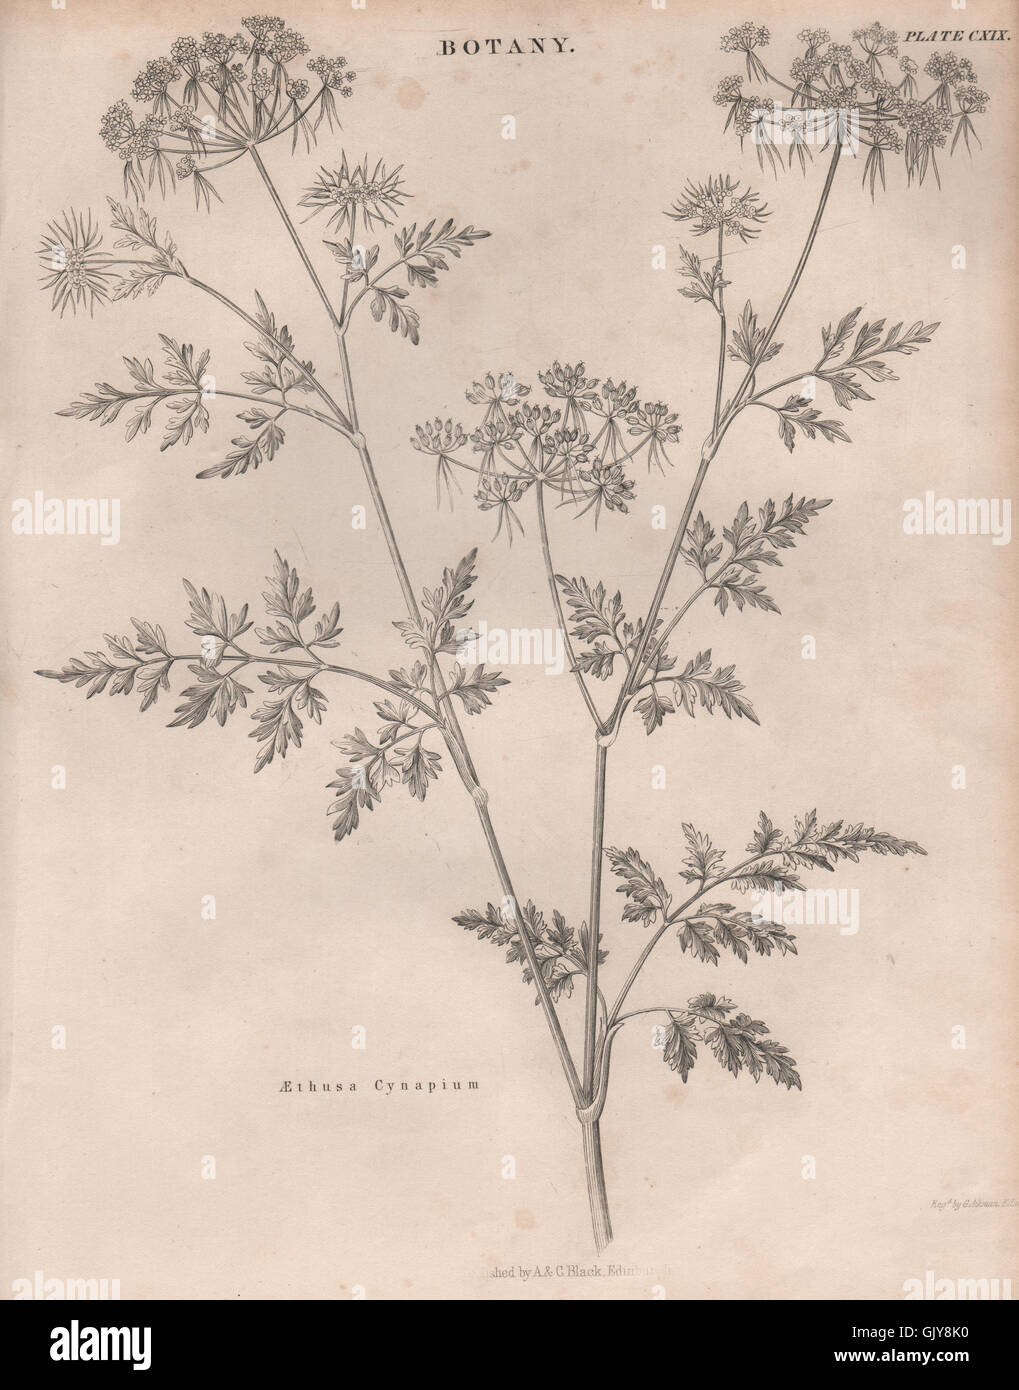 Aethusa Cynapium (fool's parsley, fool's cicely, poison parsley) BRITANNICA 1860 Stock Photo